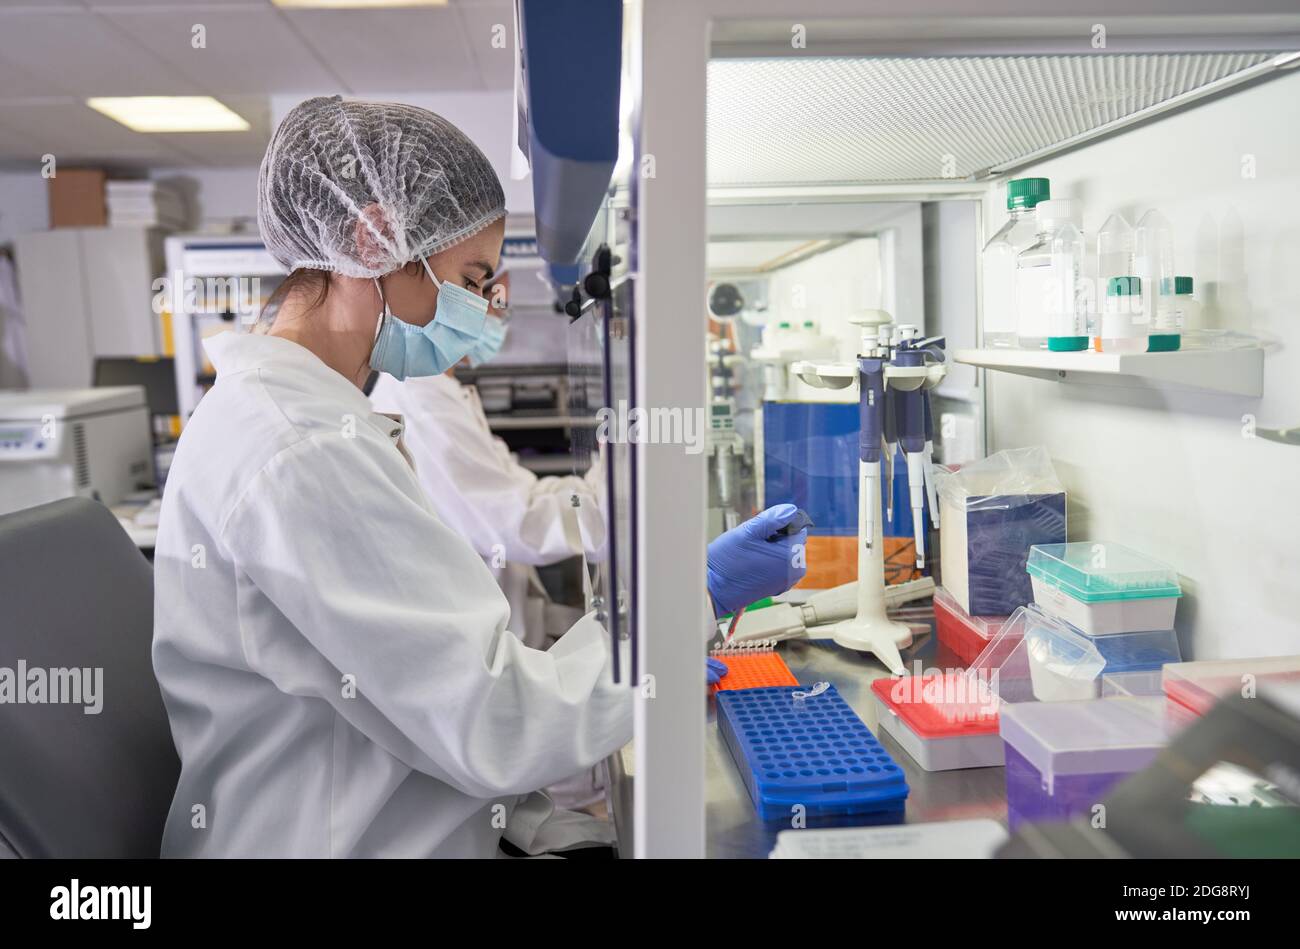 Female scientist filling pipette trays at fume hood in laboratory Stock Photo